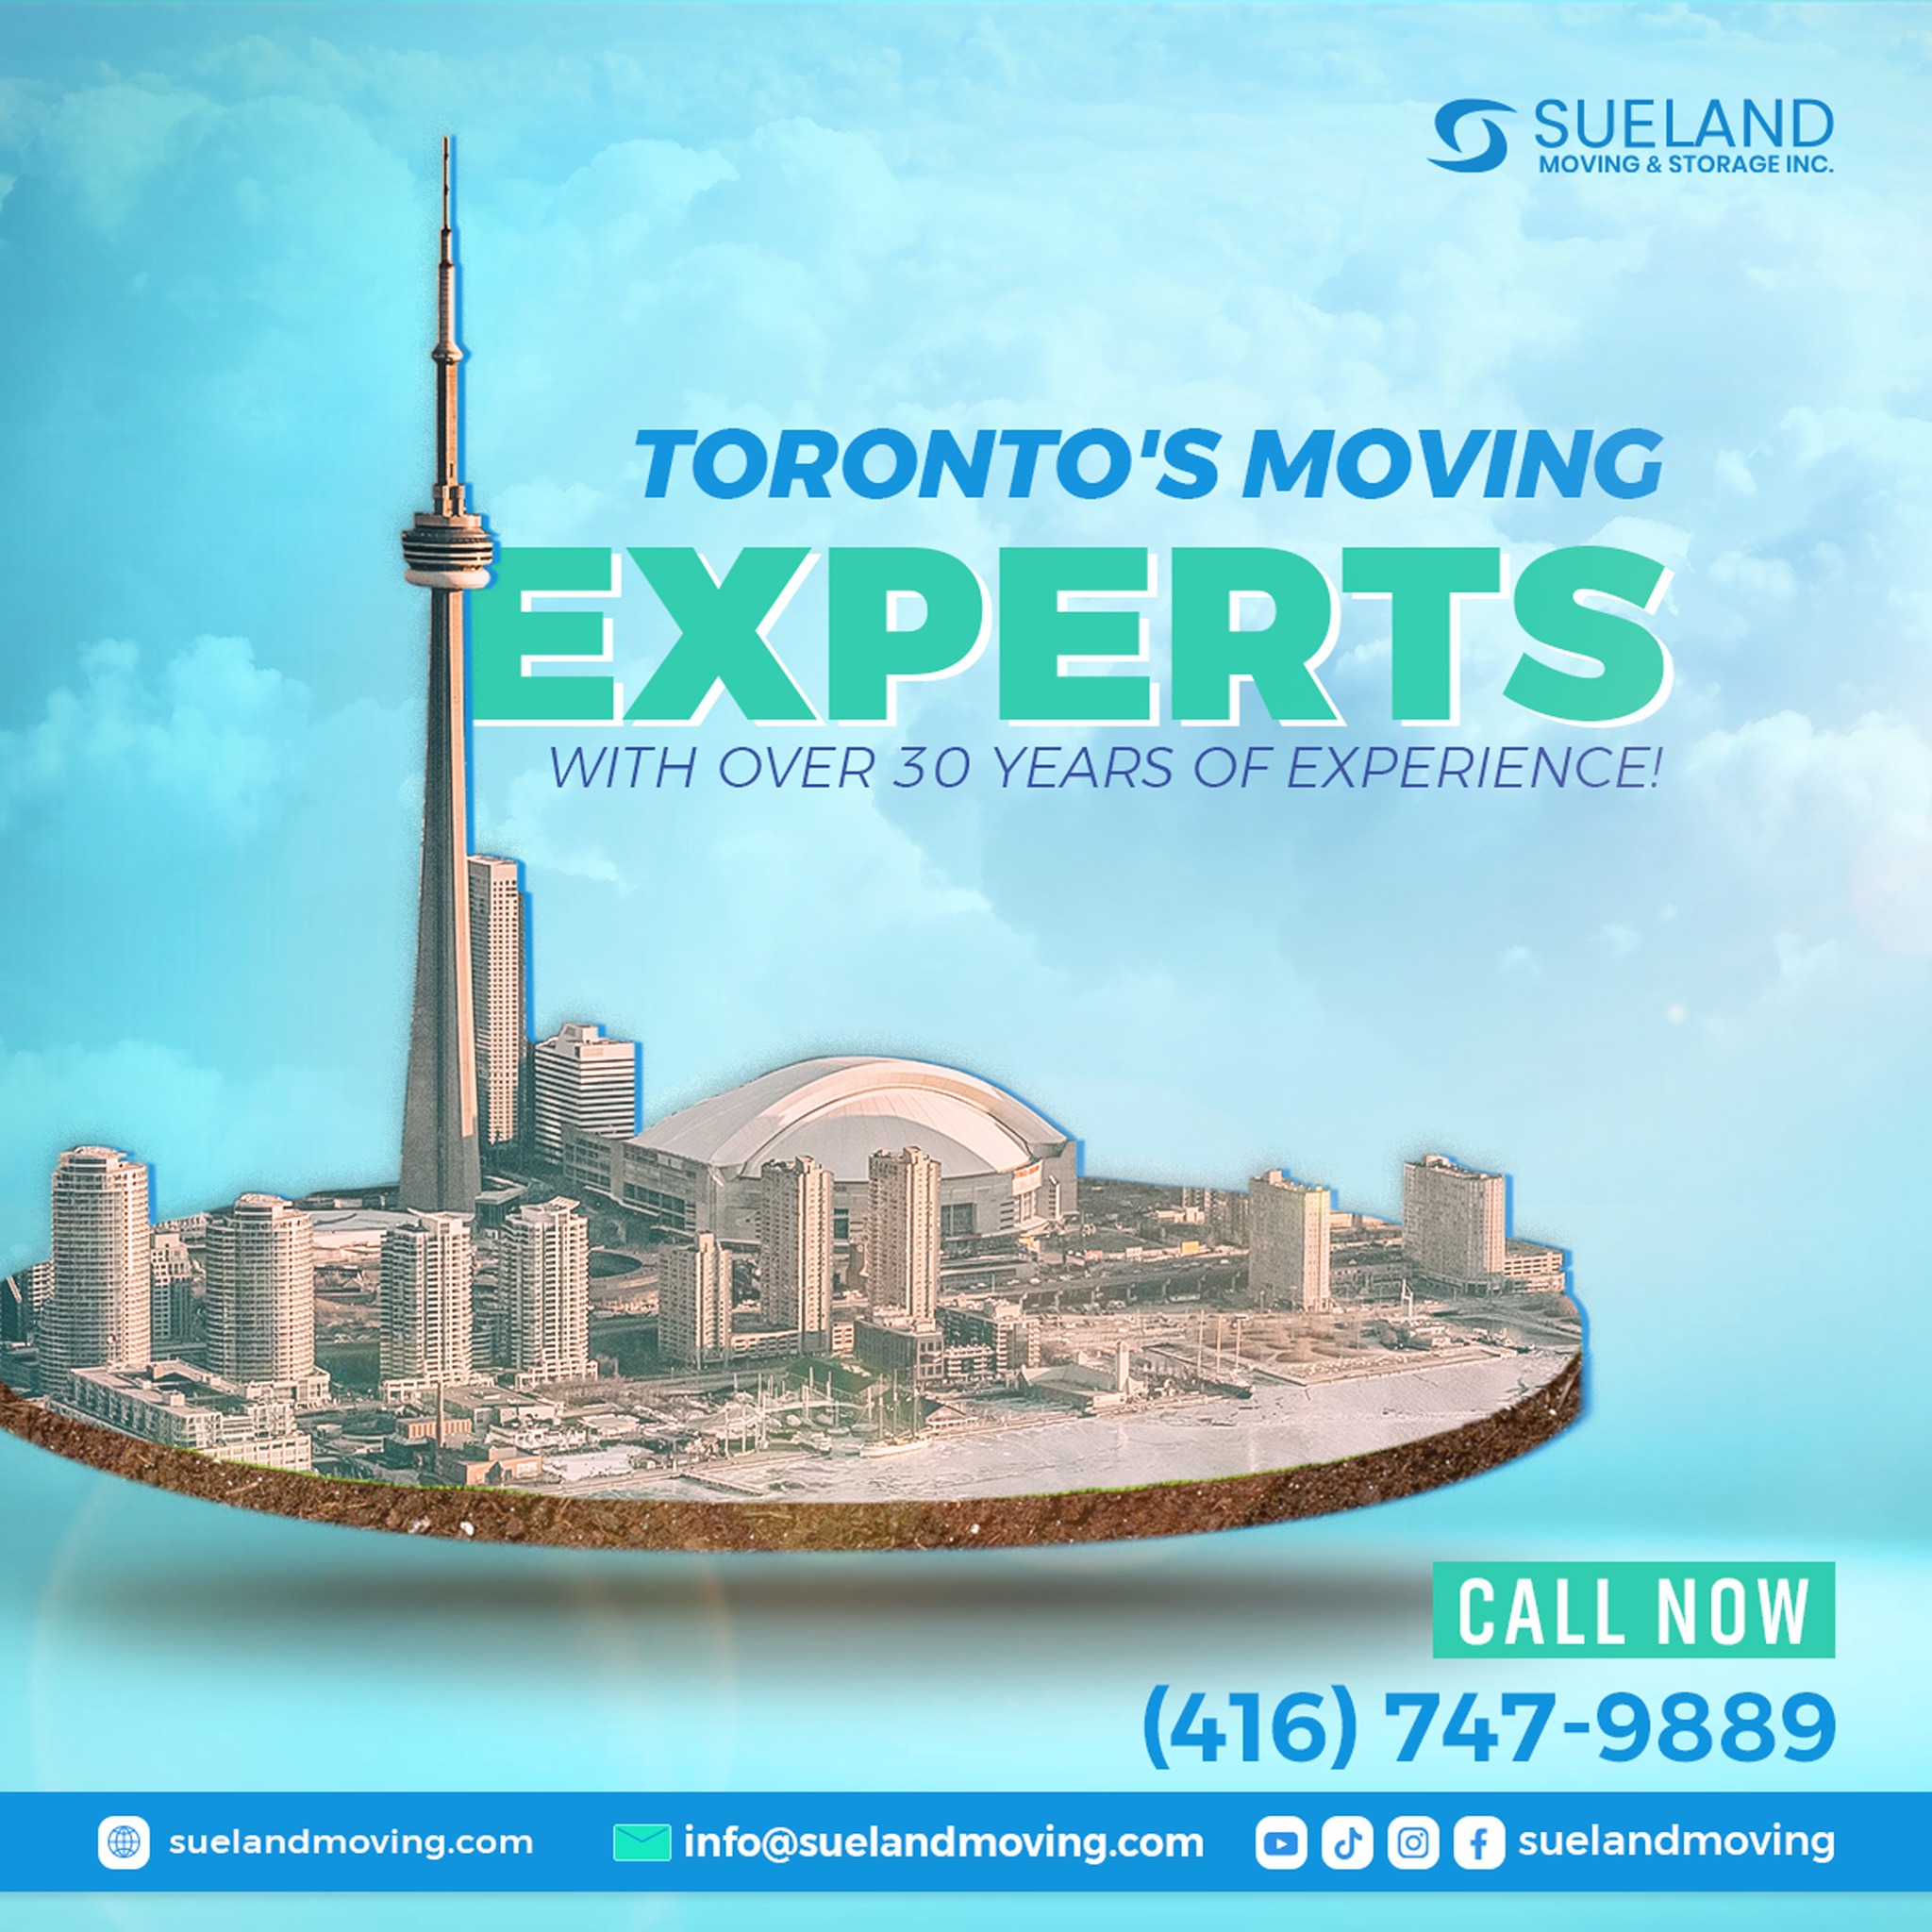 Simplify Your Toronto Relocation Experience With Sueland